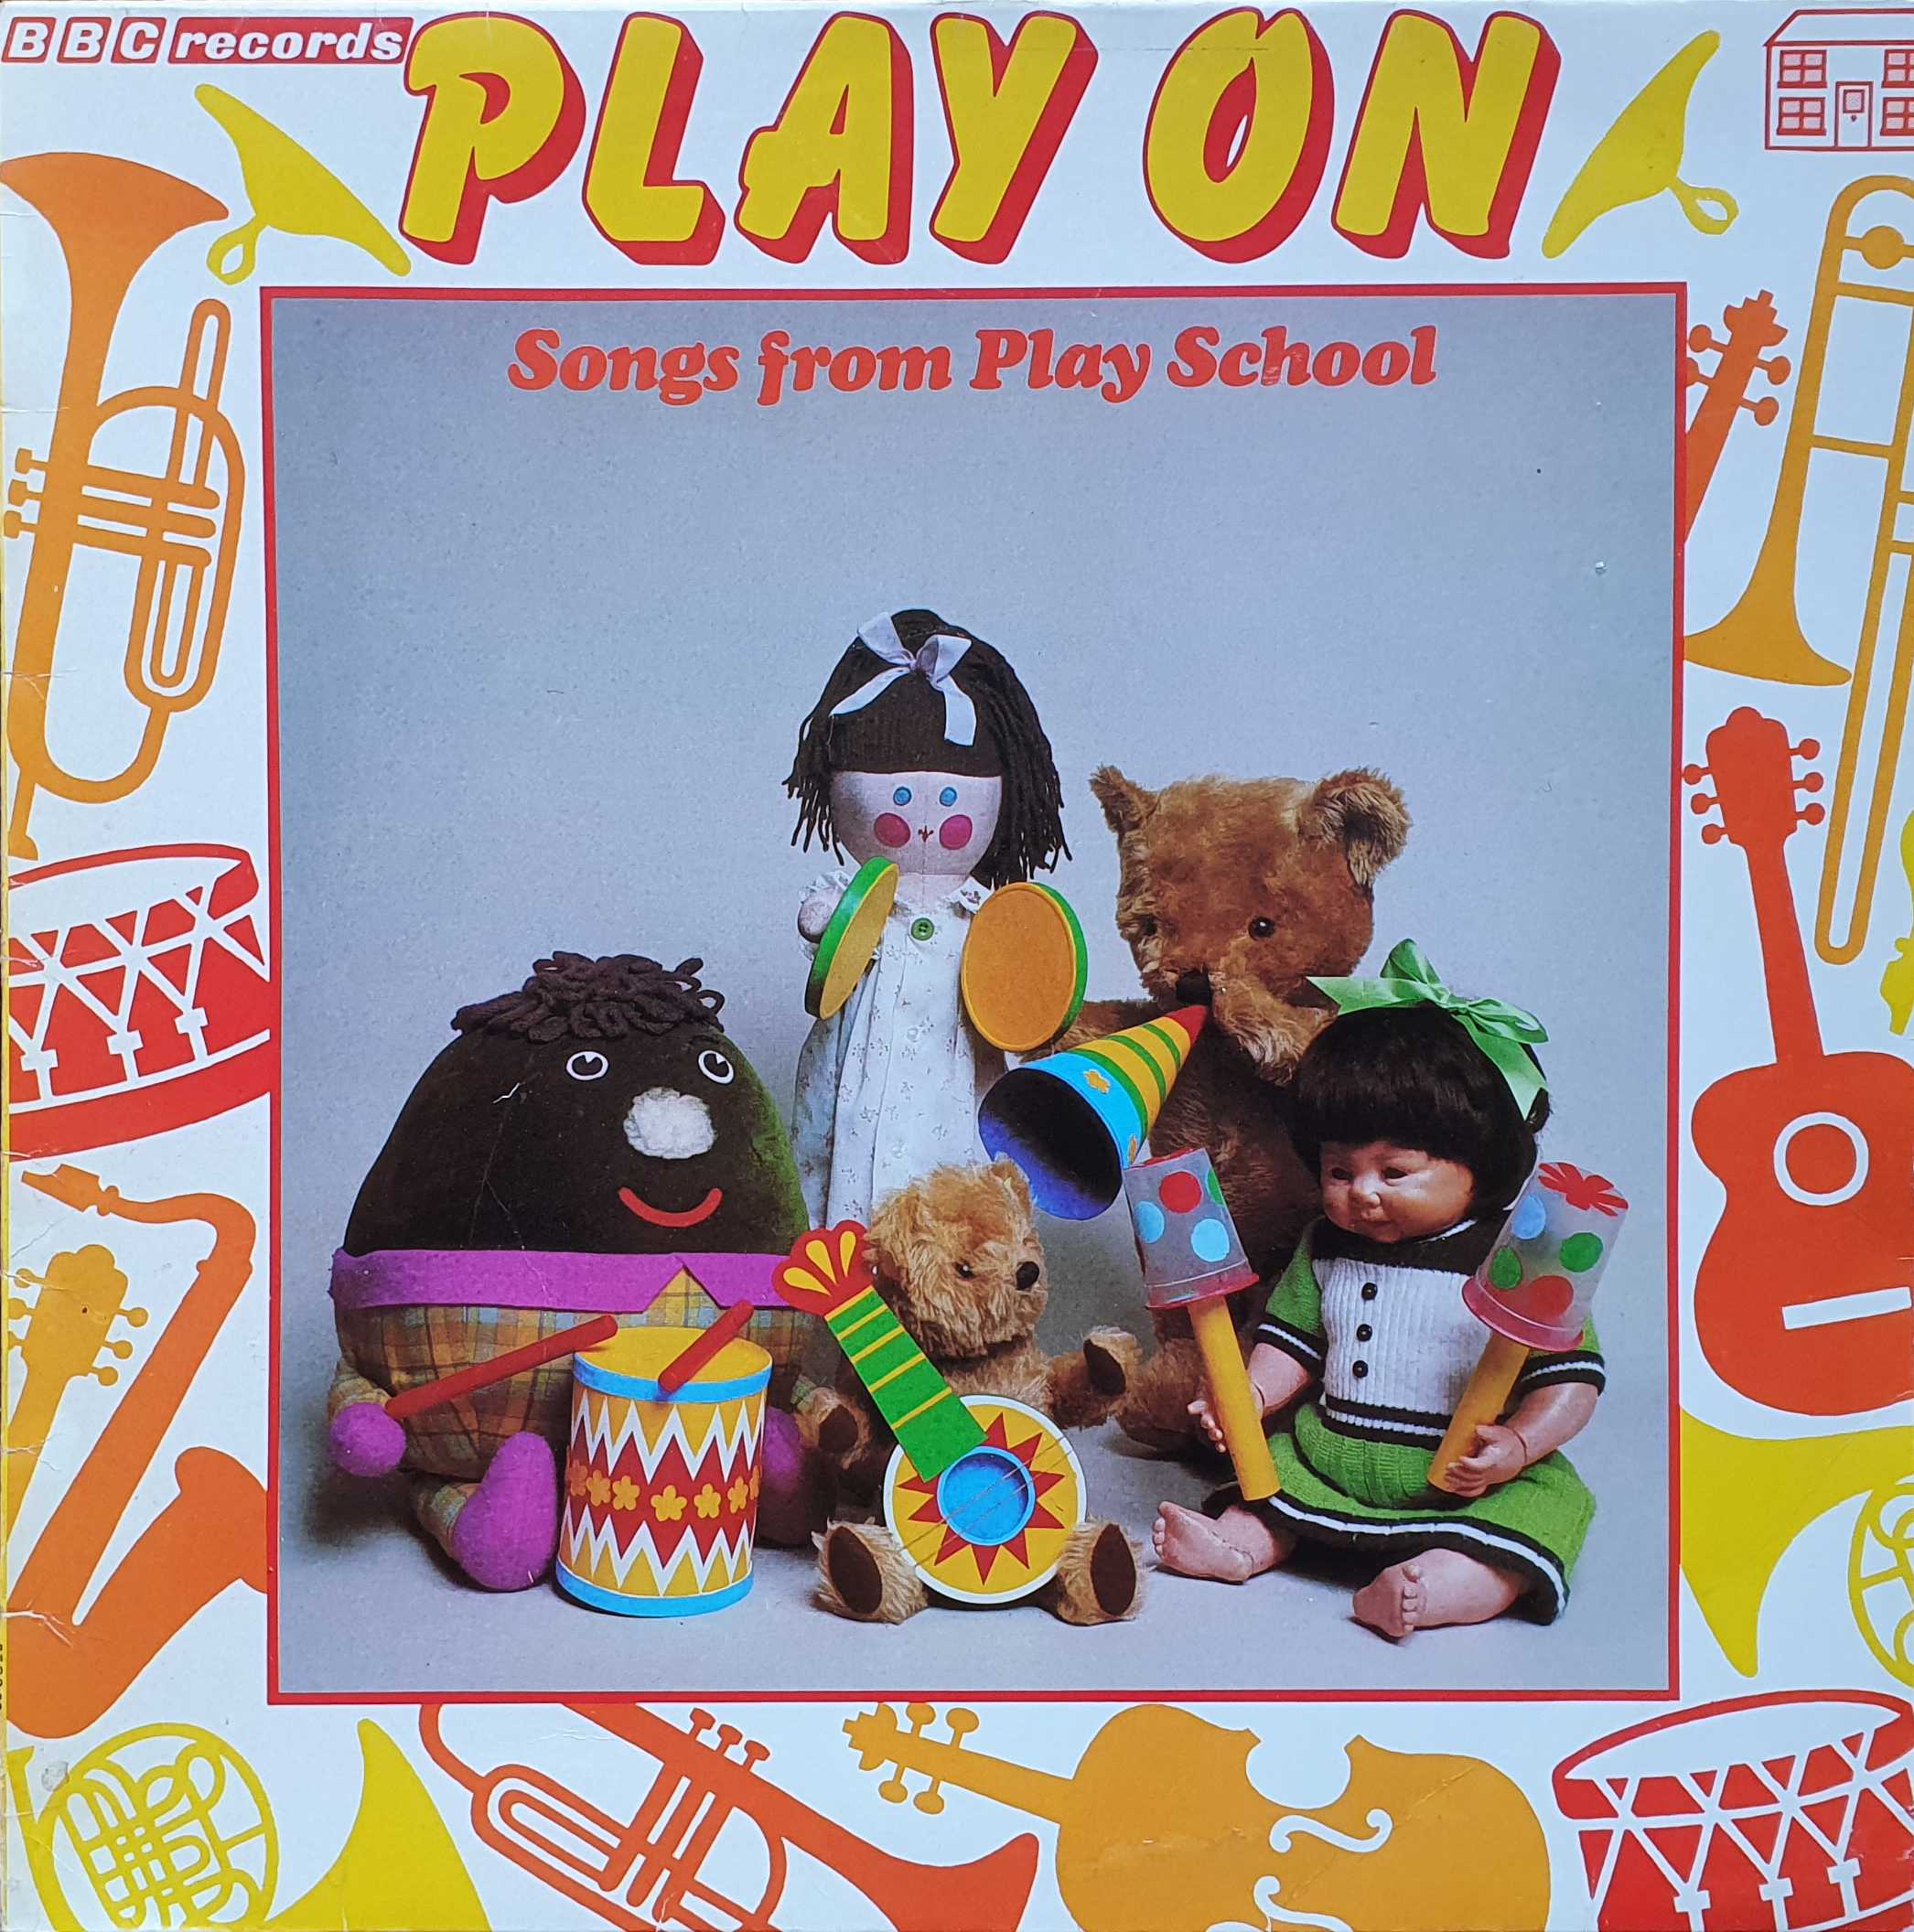 Picture of REC 332 Play on (Songs from play school) by artist Various from the BBC albums - Records and Tapes library